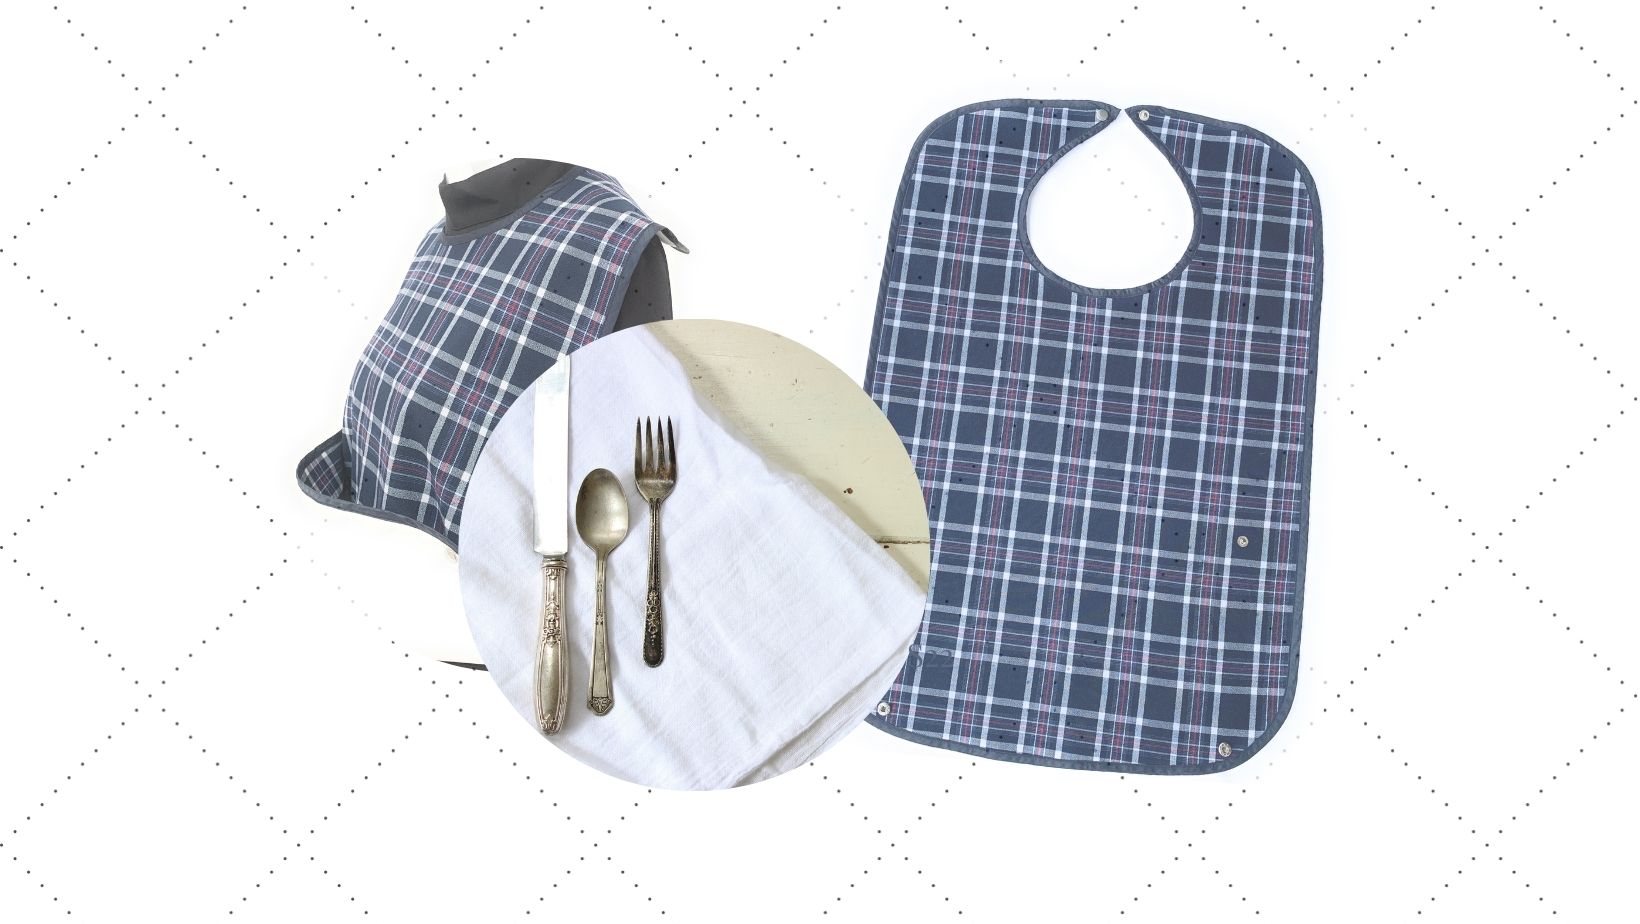 Sestra Care clothing protector to assist the sick with meals